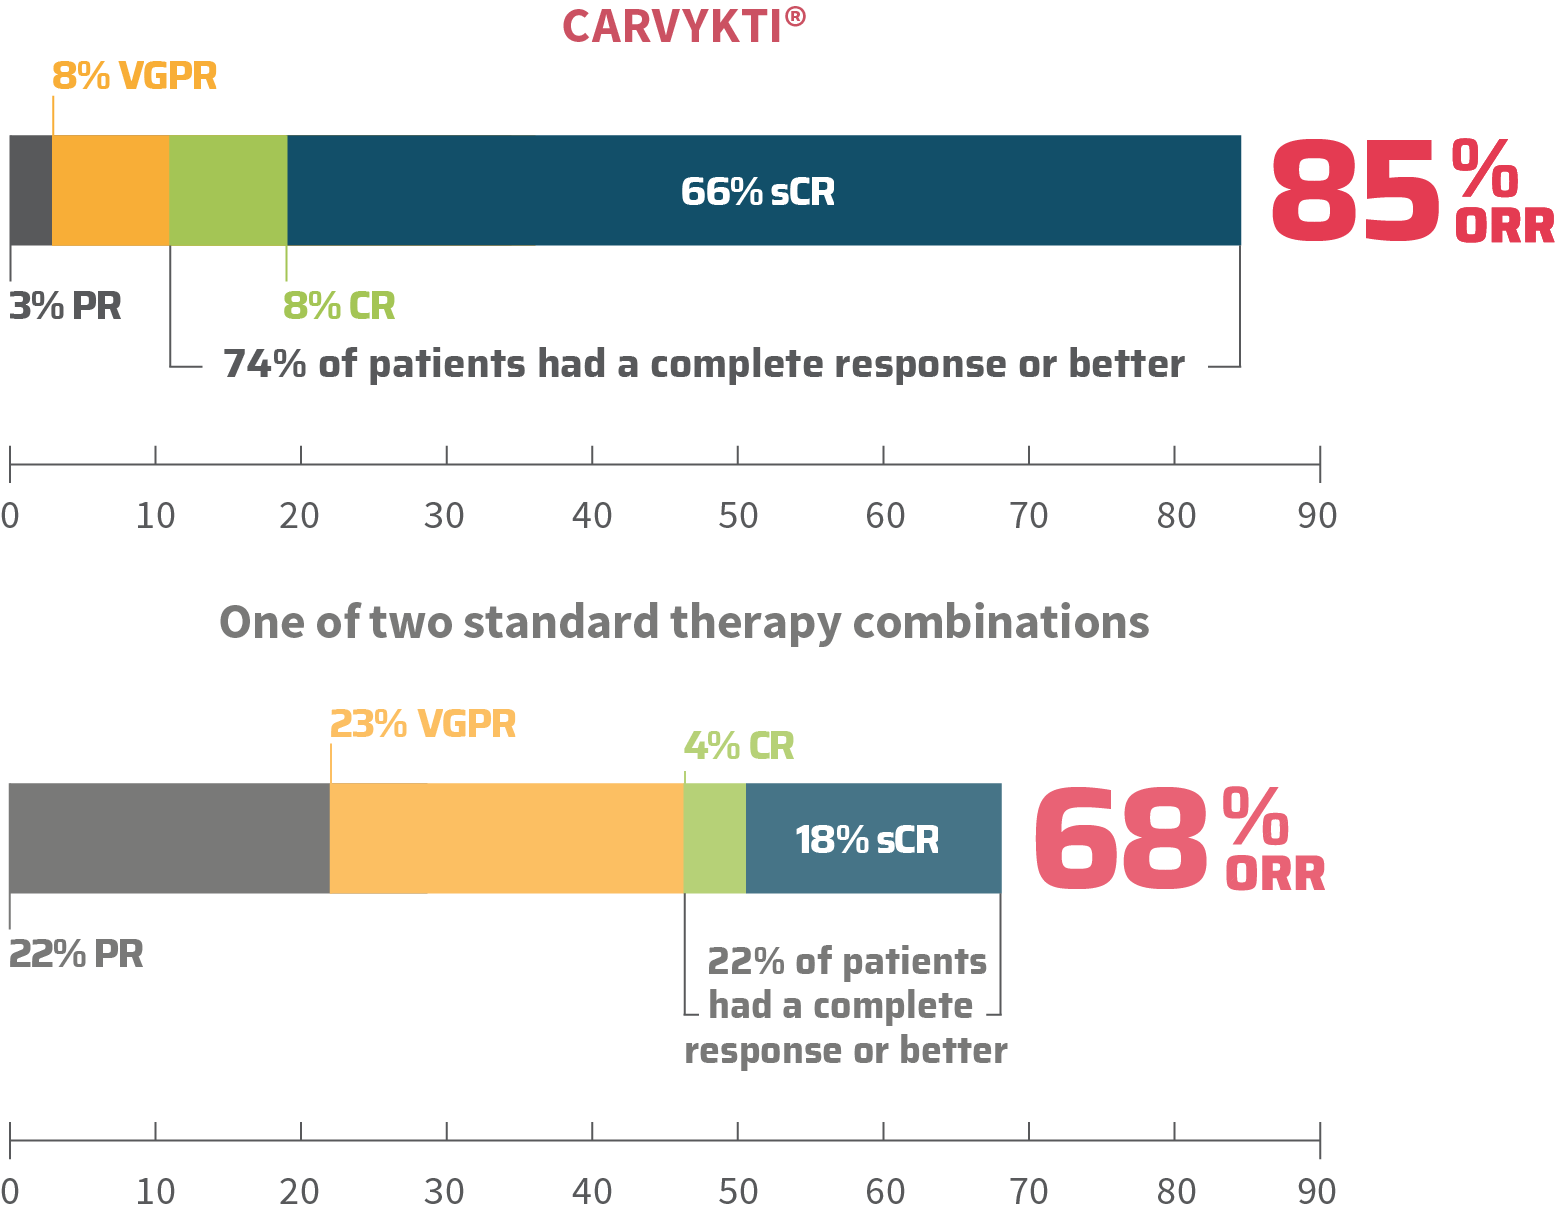 Chart showing CARVYKTI® 85% ORR versus 67% of one of two standard therapy combinations